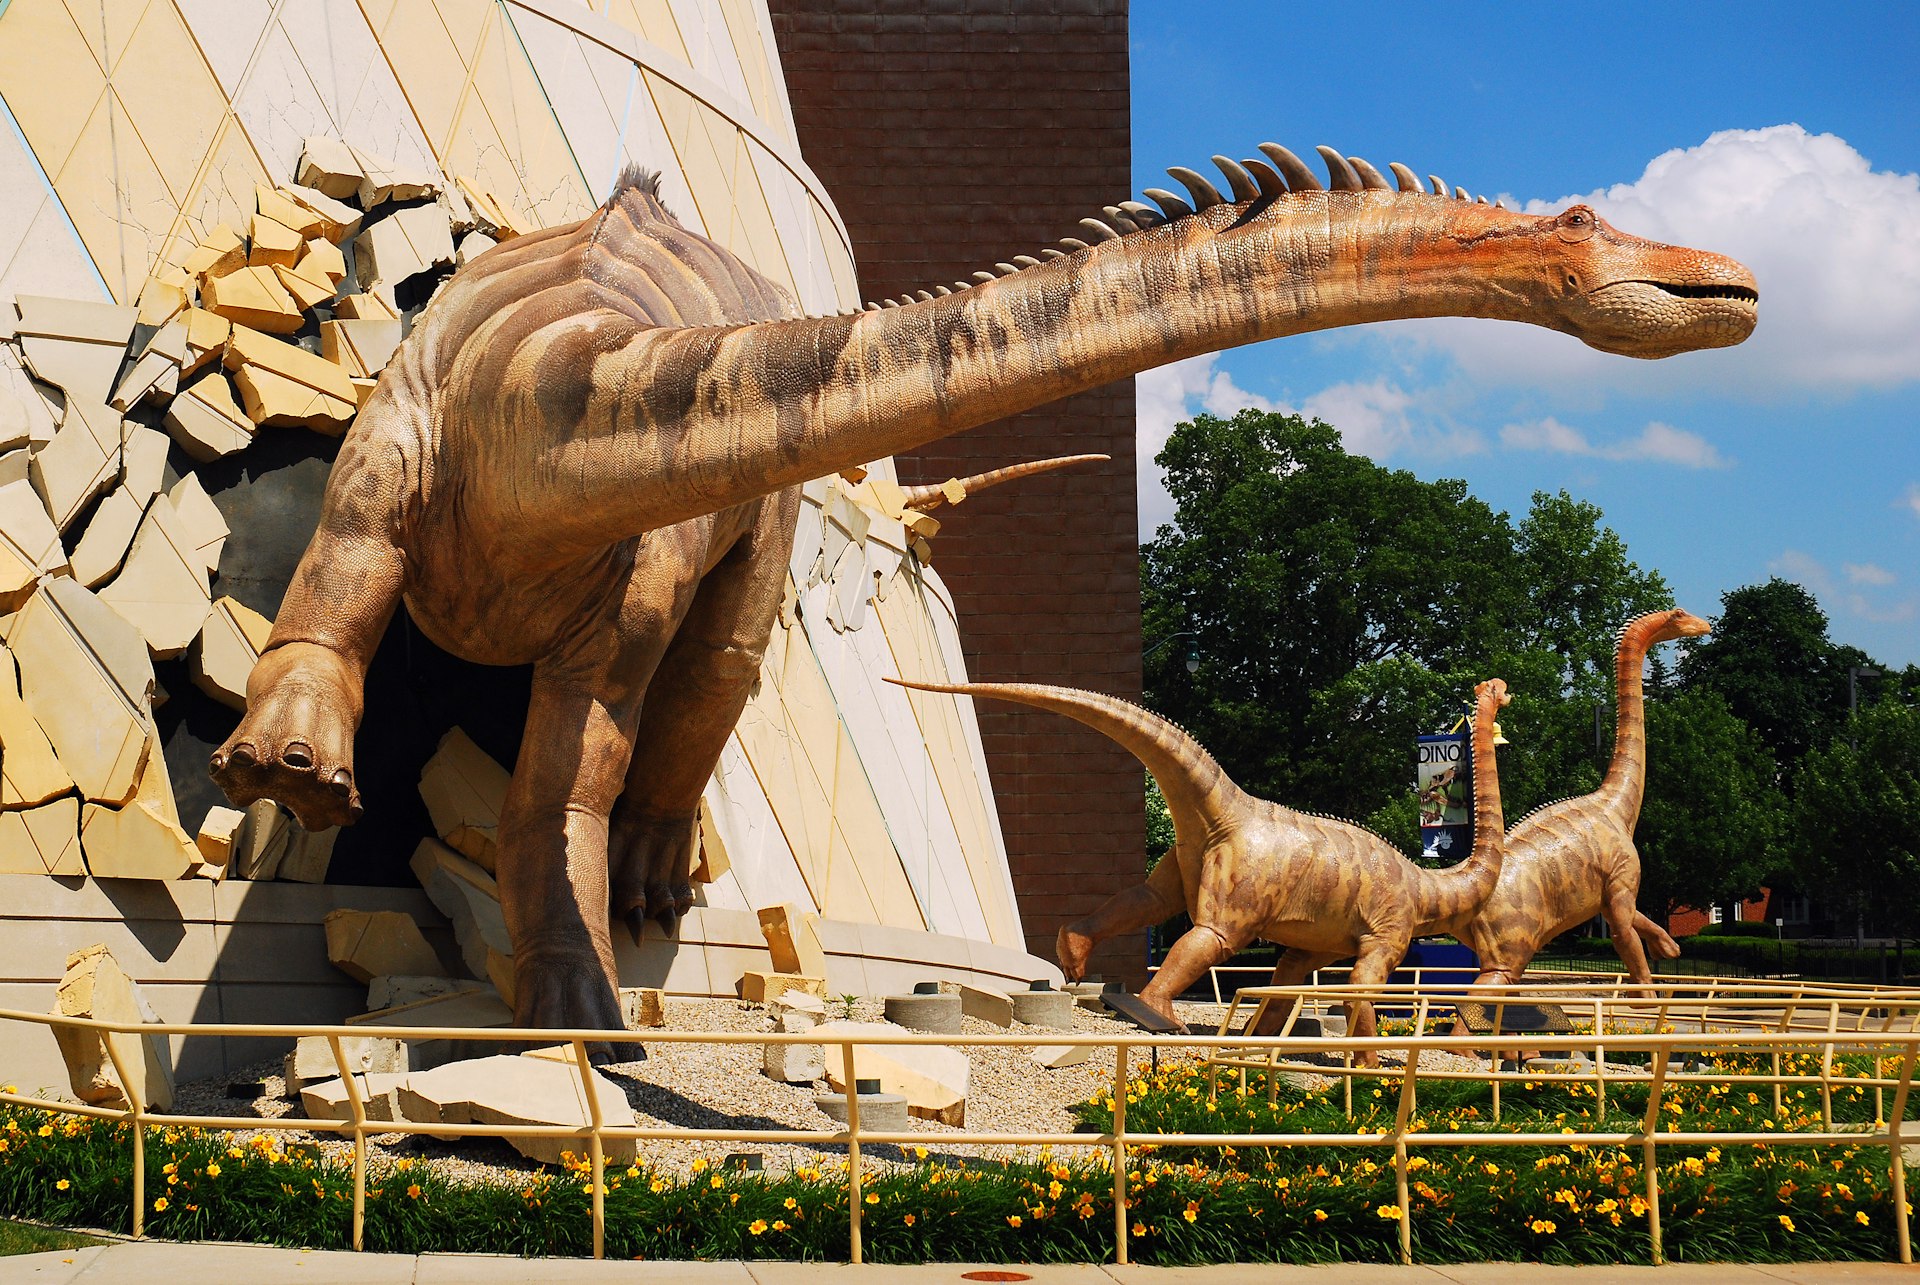 Dinosaur "breaks out" of the wall at the Indianapolis Children's Museum